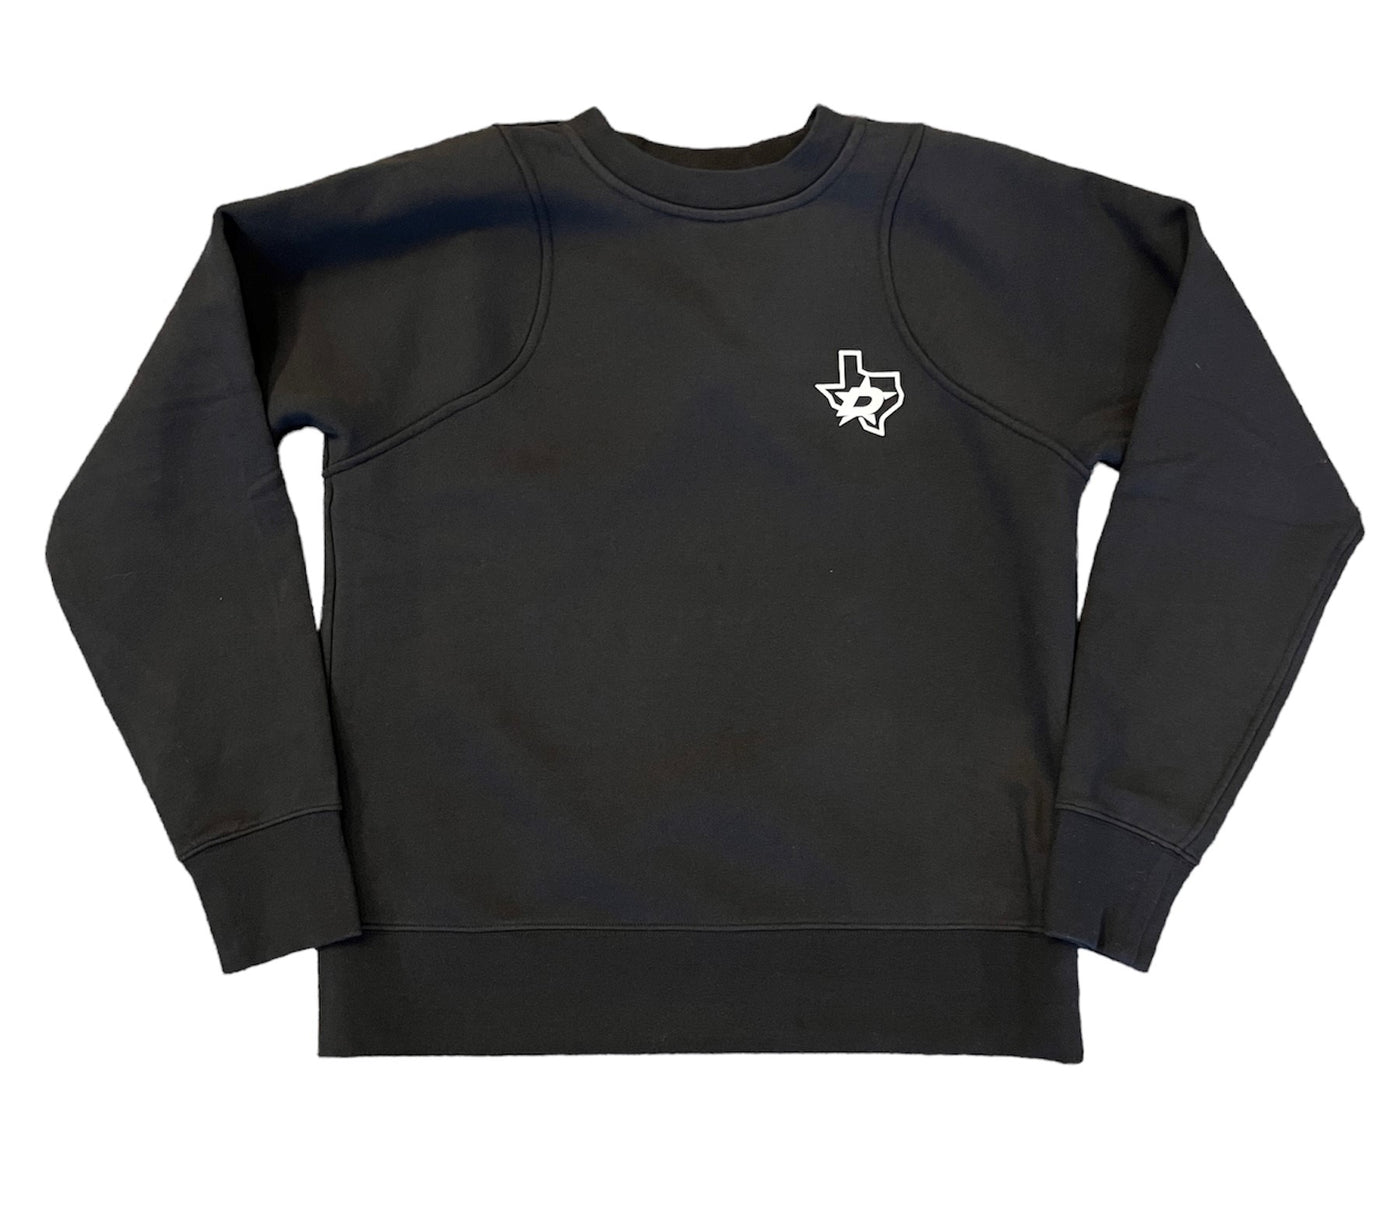 Photo of DALLAS STARS LULULEMON WOMENS LOUNGEFUL CREWNECK PULLOVER BLACK - Front view